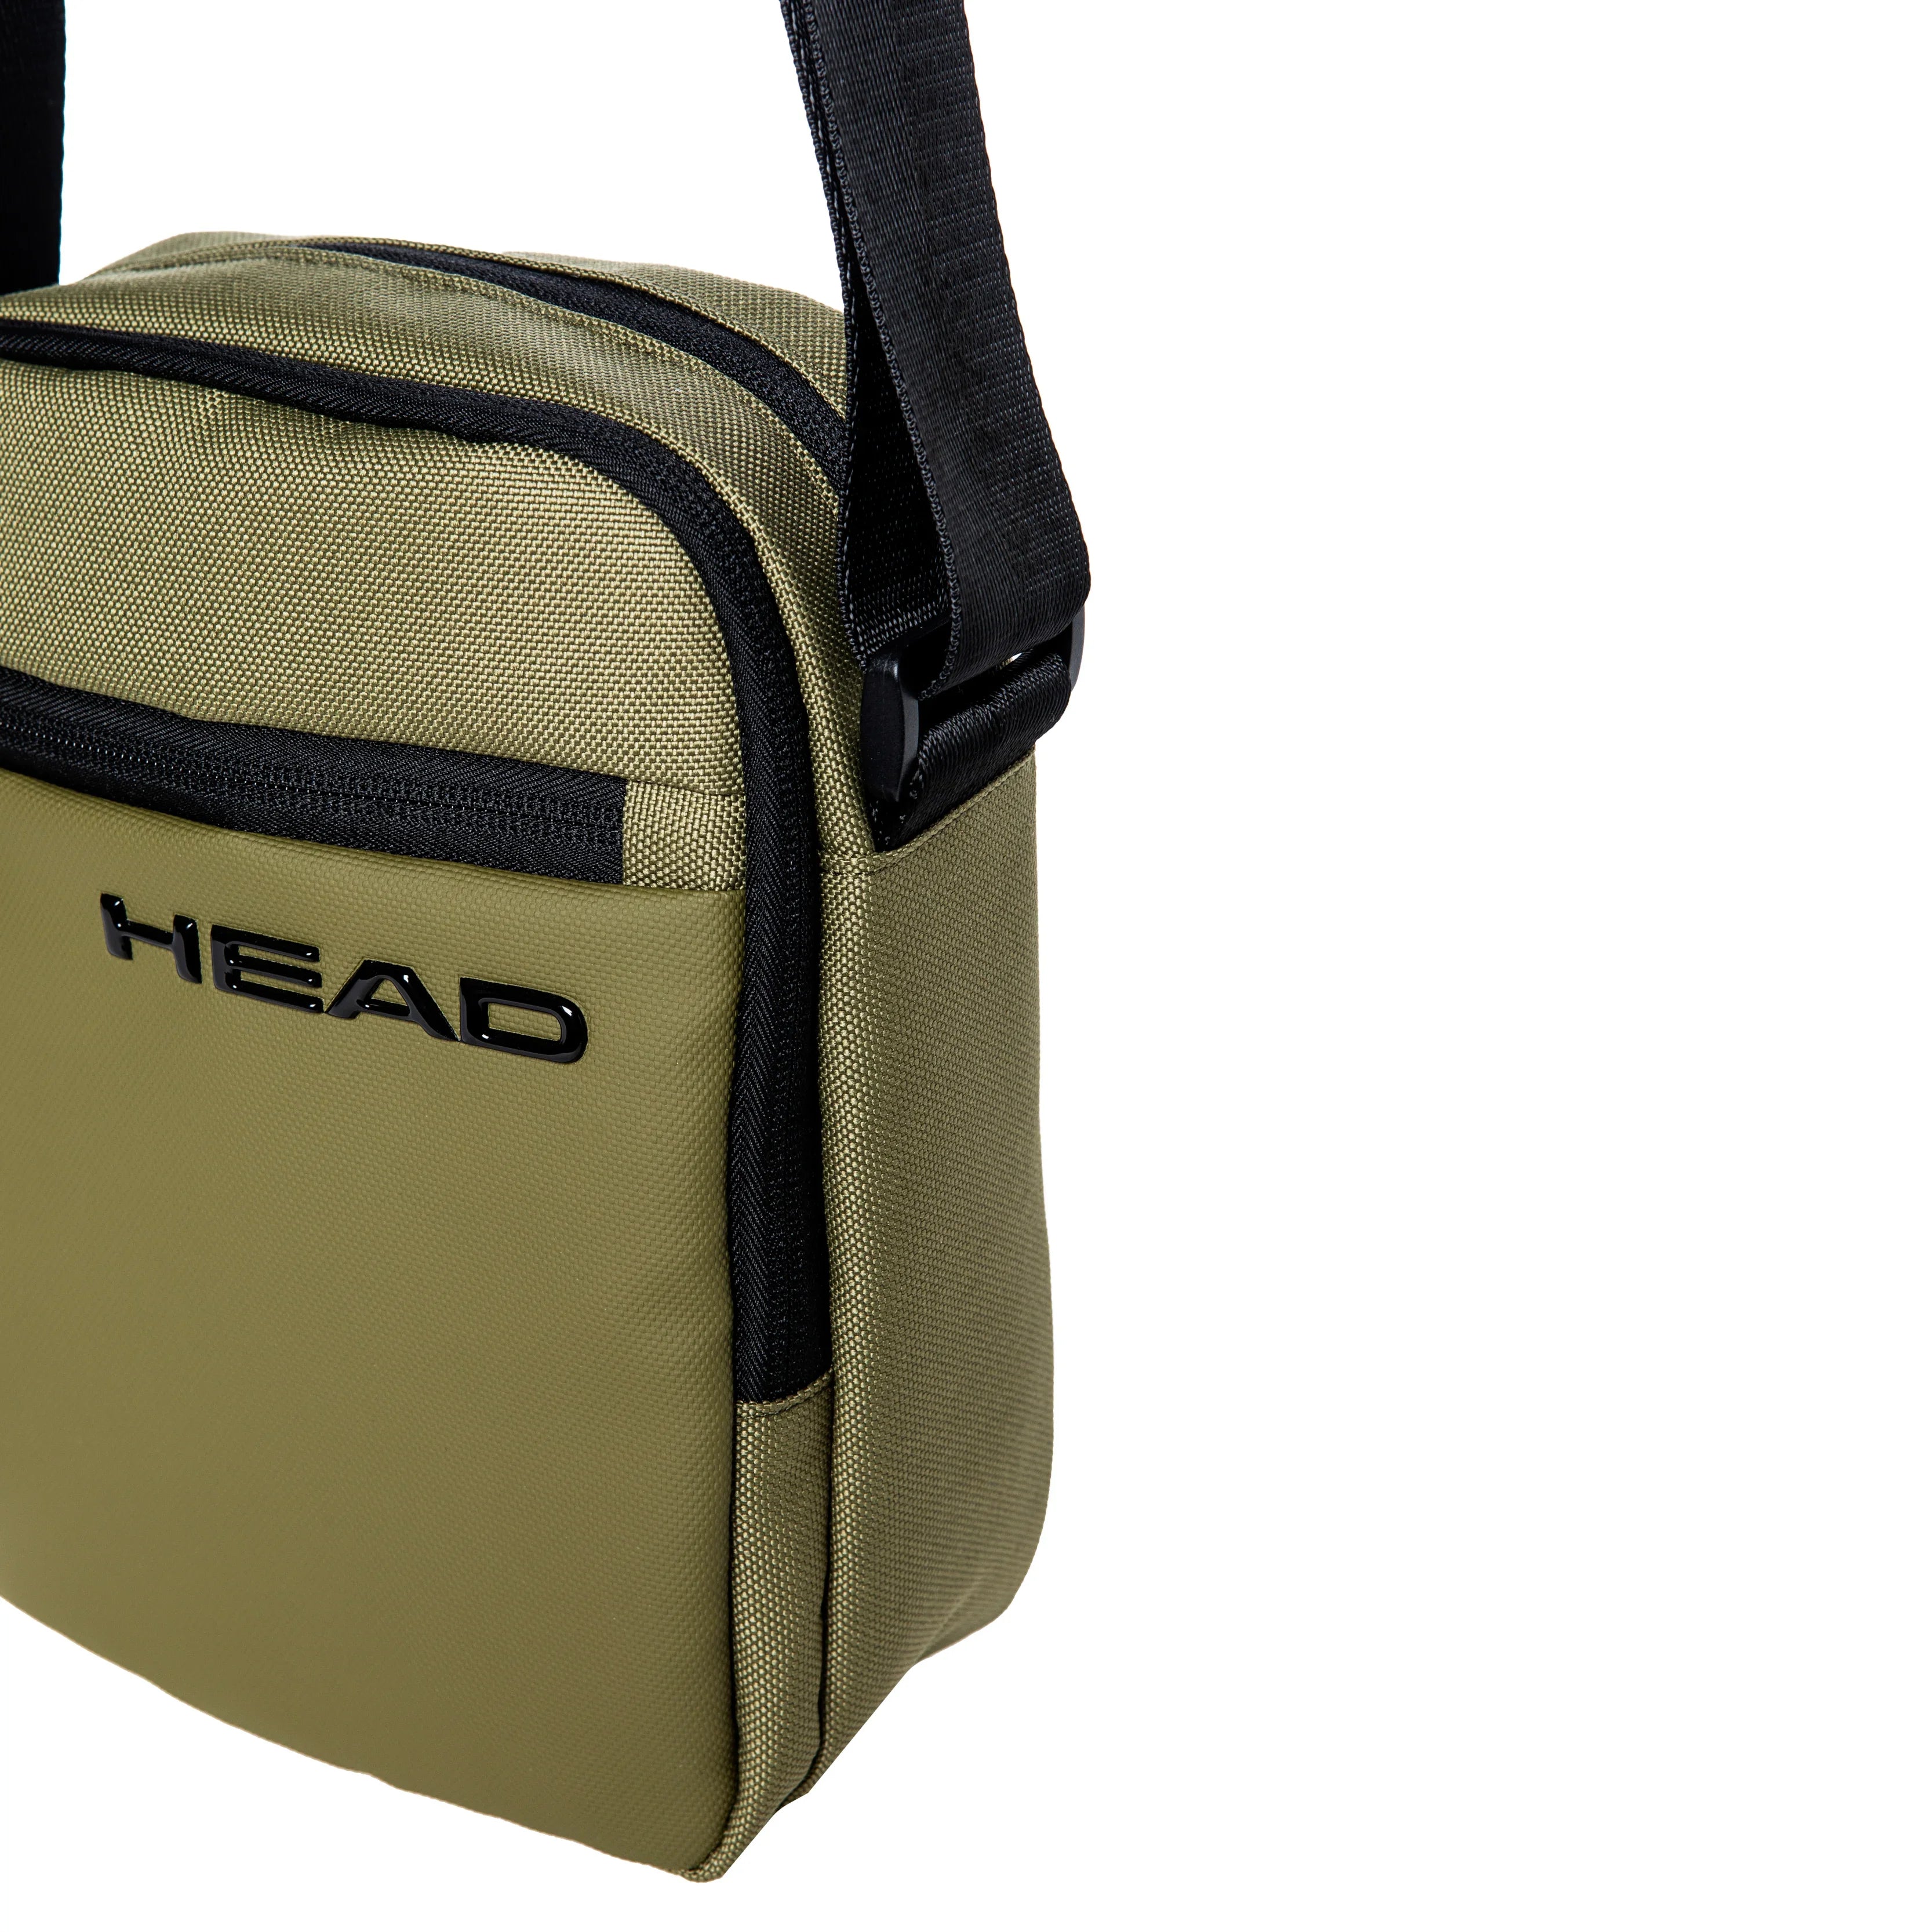 Head Game Reporter 2 Compartments 22 cm - lh gray